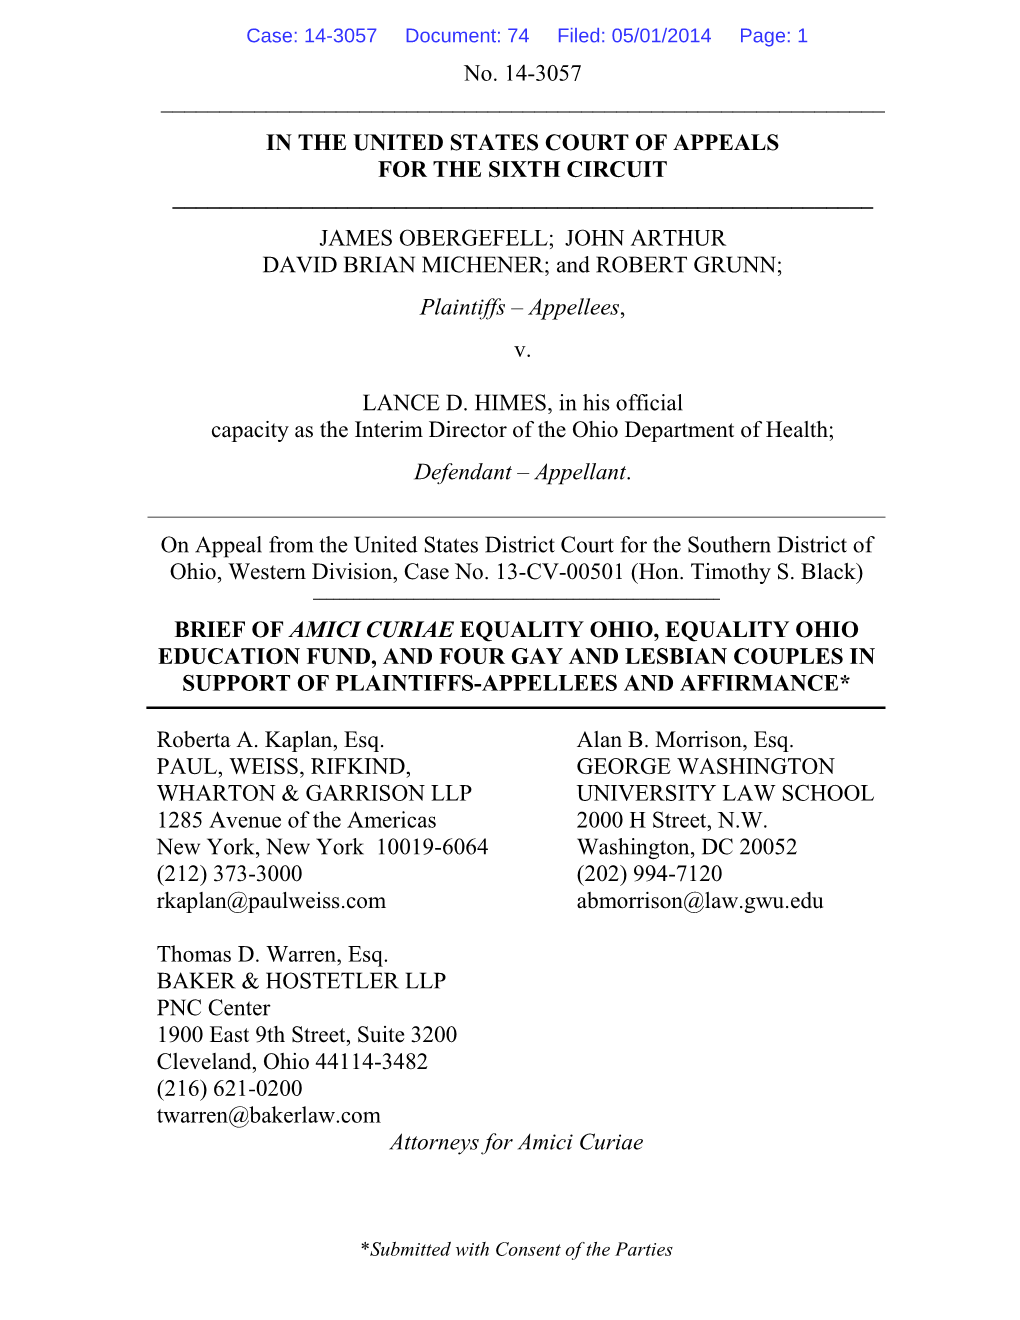 On Appeal from the United States District Court for the Southern District of Ohio, Western Division, Case No